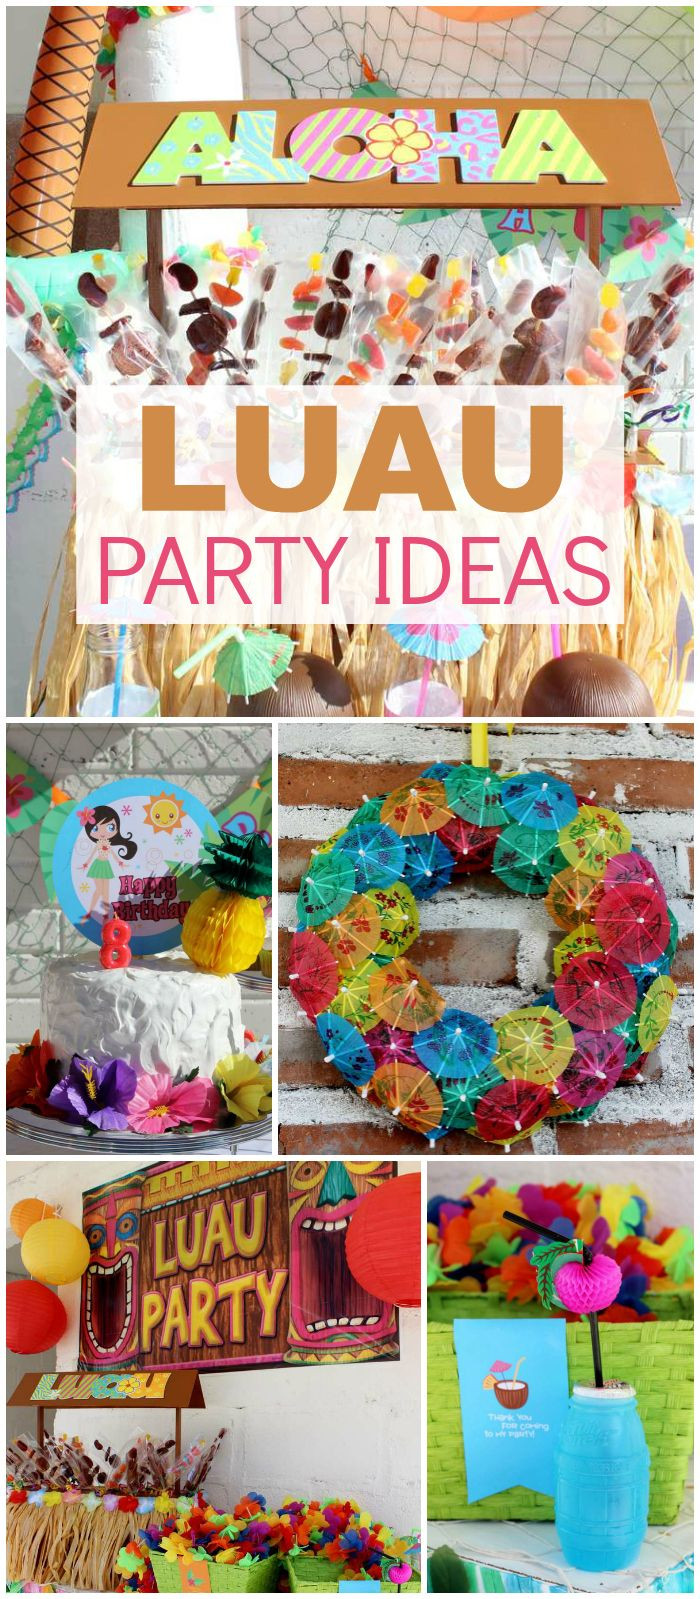 Summer Luau Party Ideas
 Aloha Here s a gorgeous luau party perfect for summertime